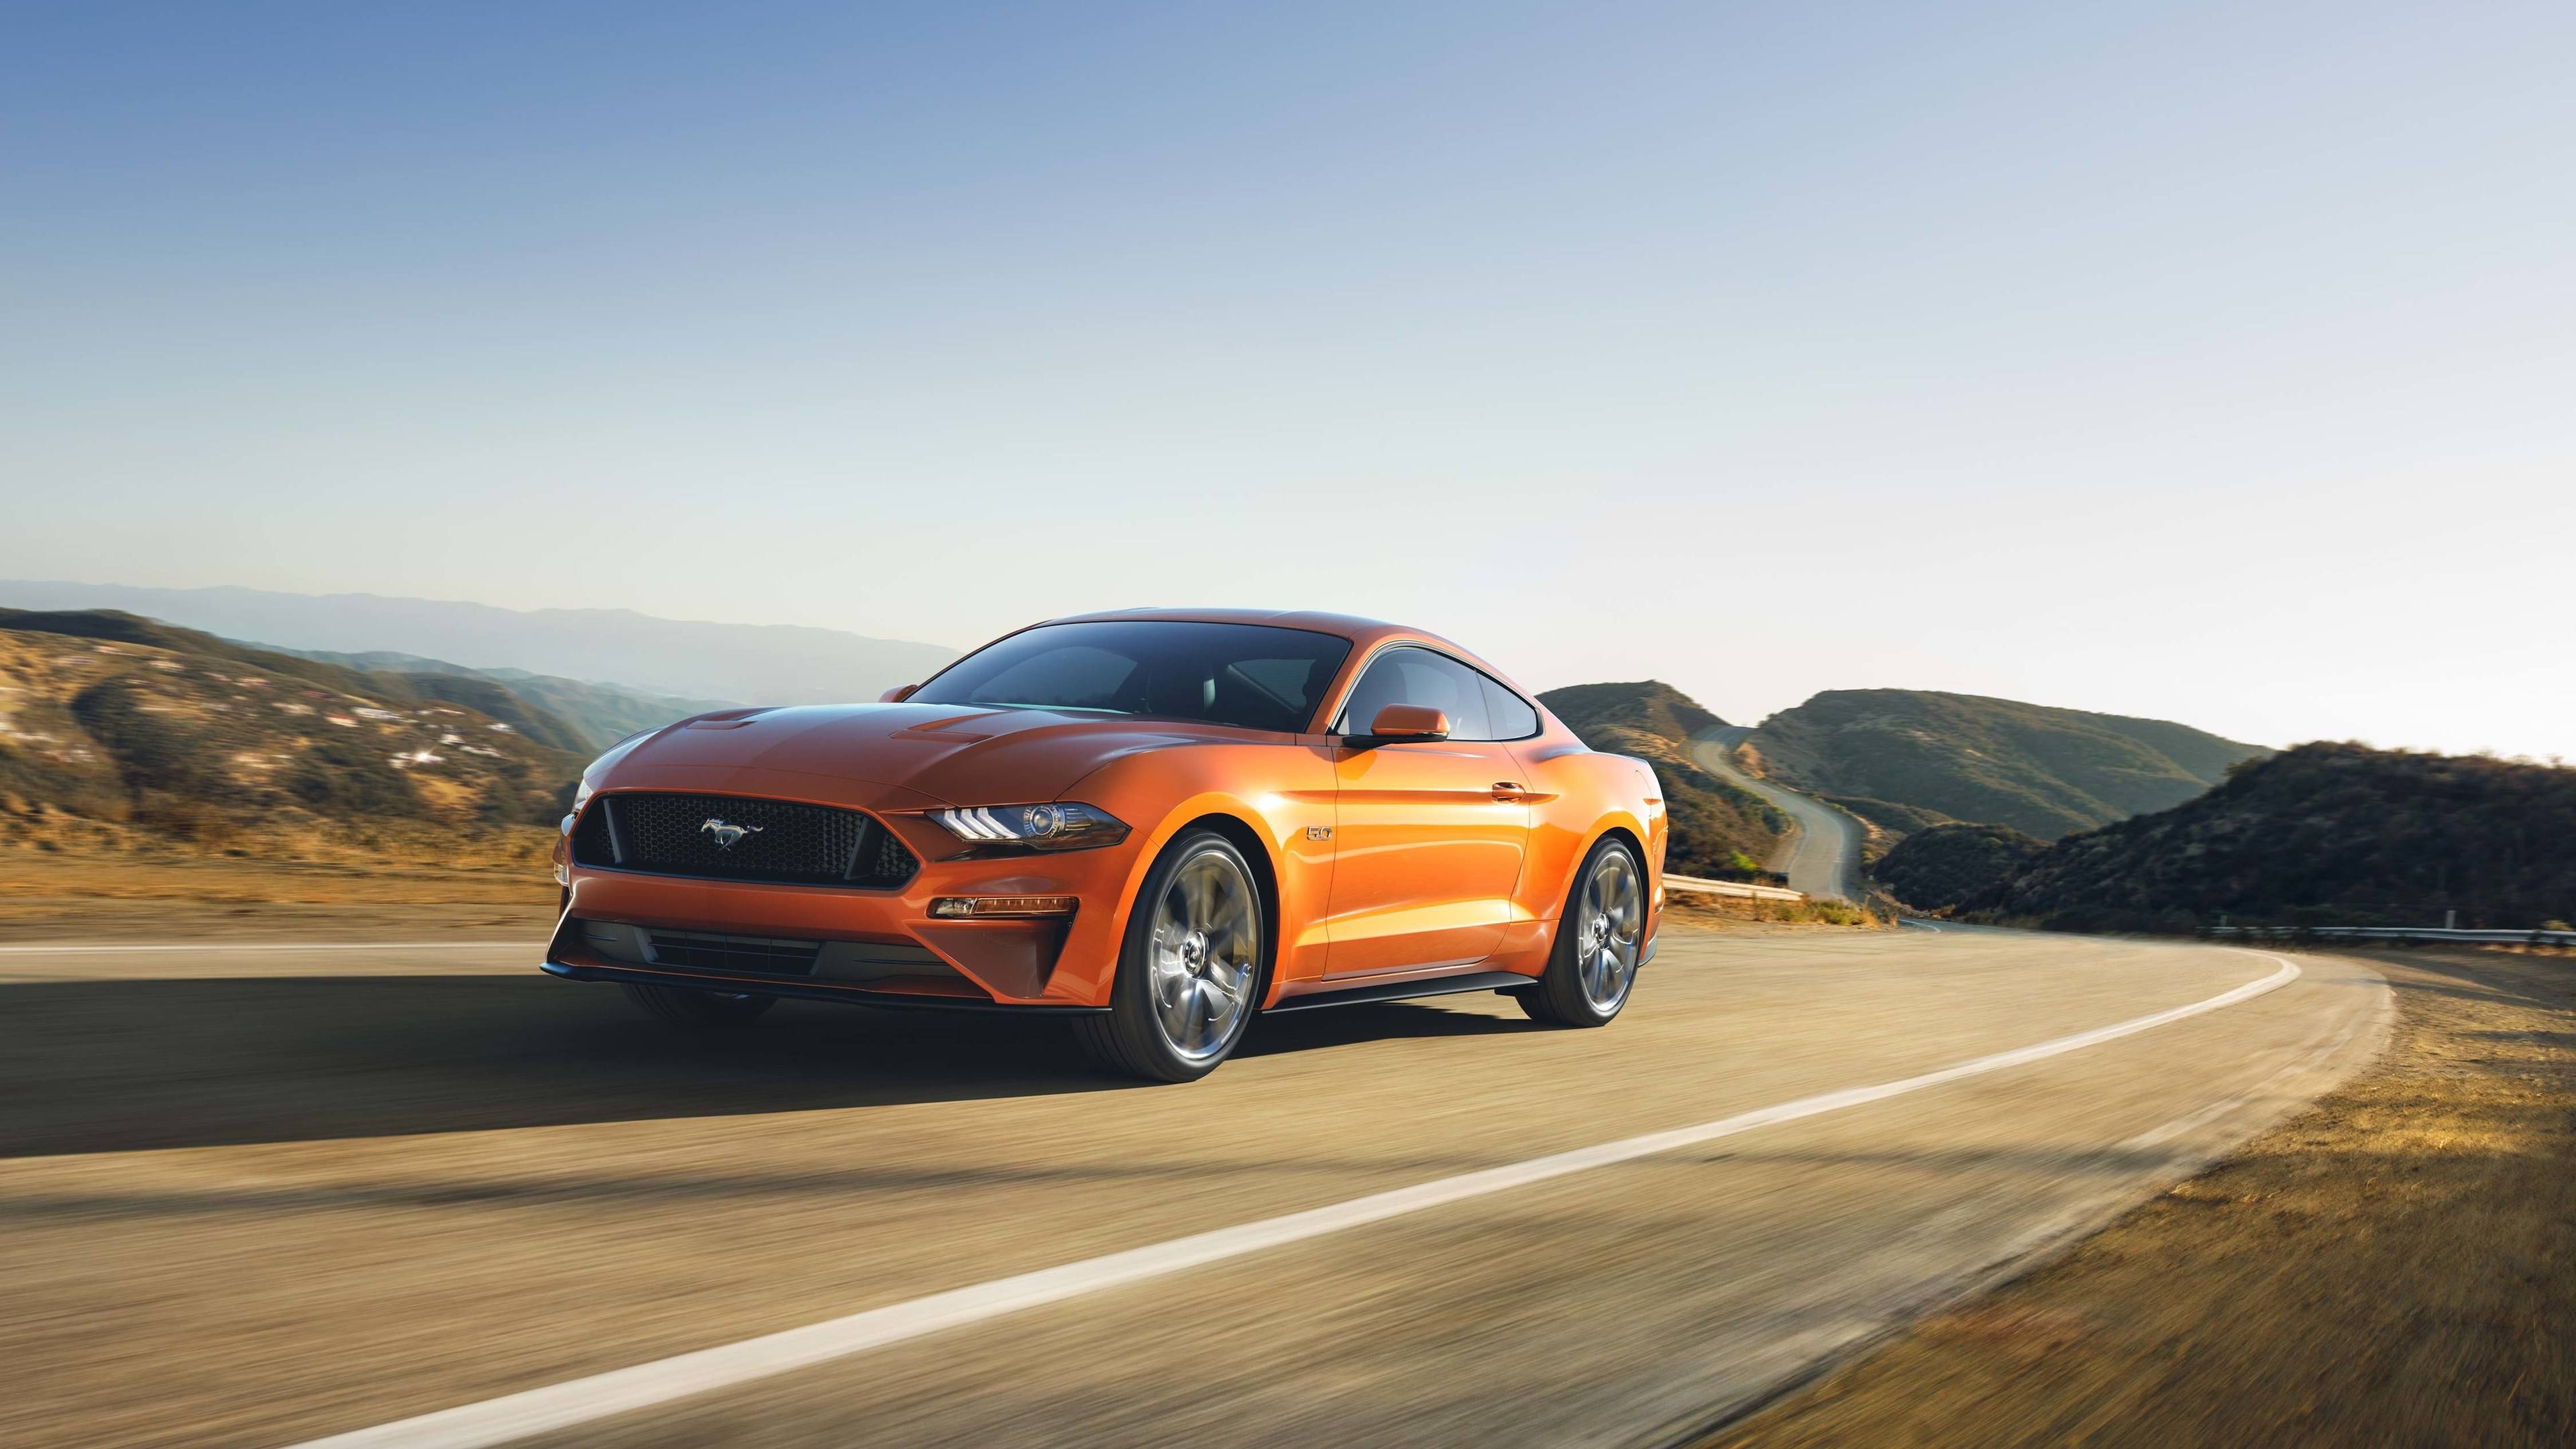 3840x2160 Ford Mustang GT 2018 4k hd-wallpapers, ford mustang wallpapers, cars  wallpapers, 4k-wallpapers, 2018 cars wallpapers